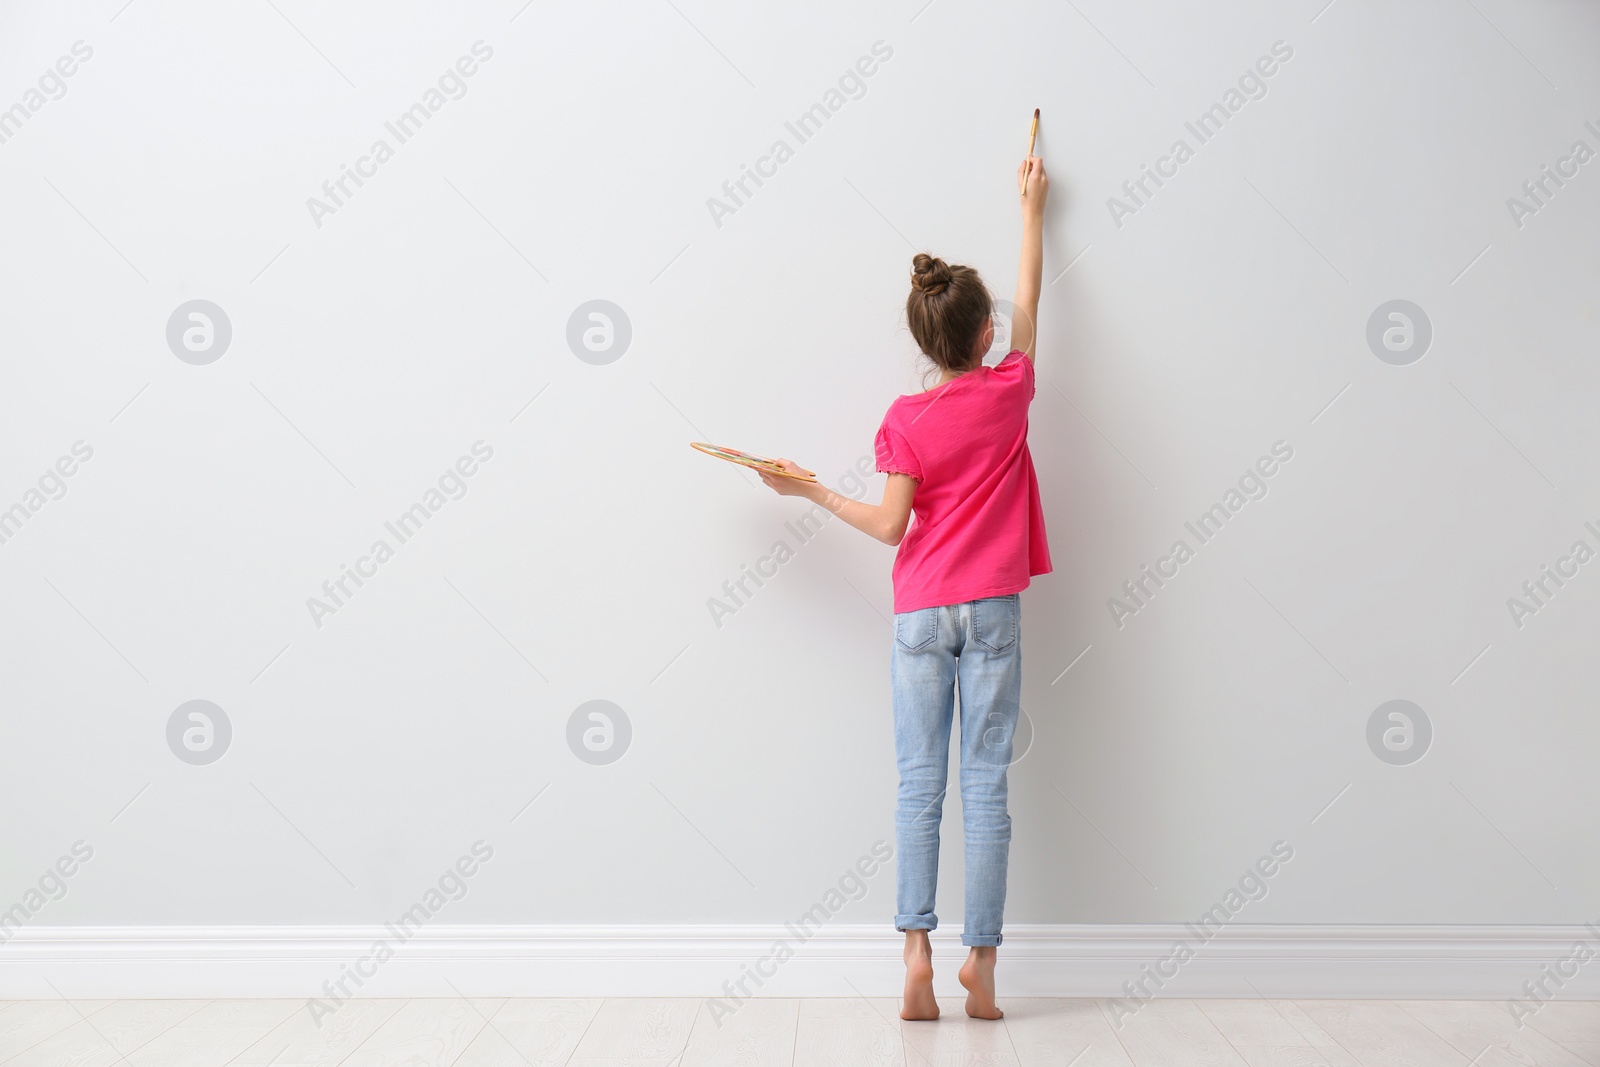 Photo of Little girl painting on light wall indoors, back view. Space for text